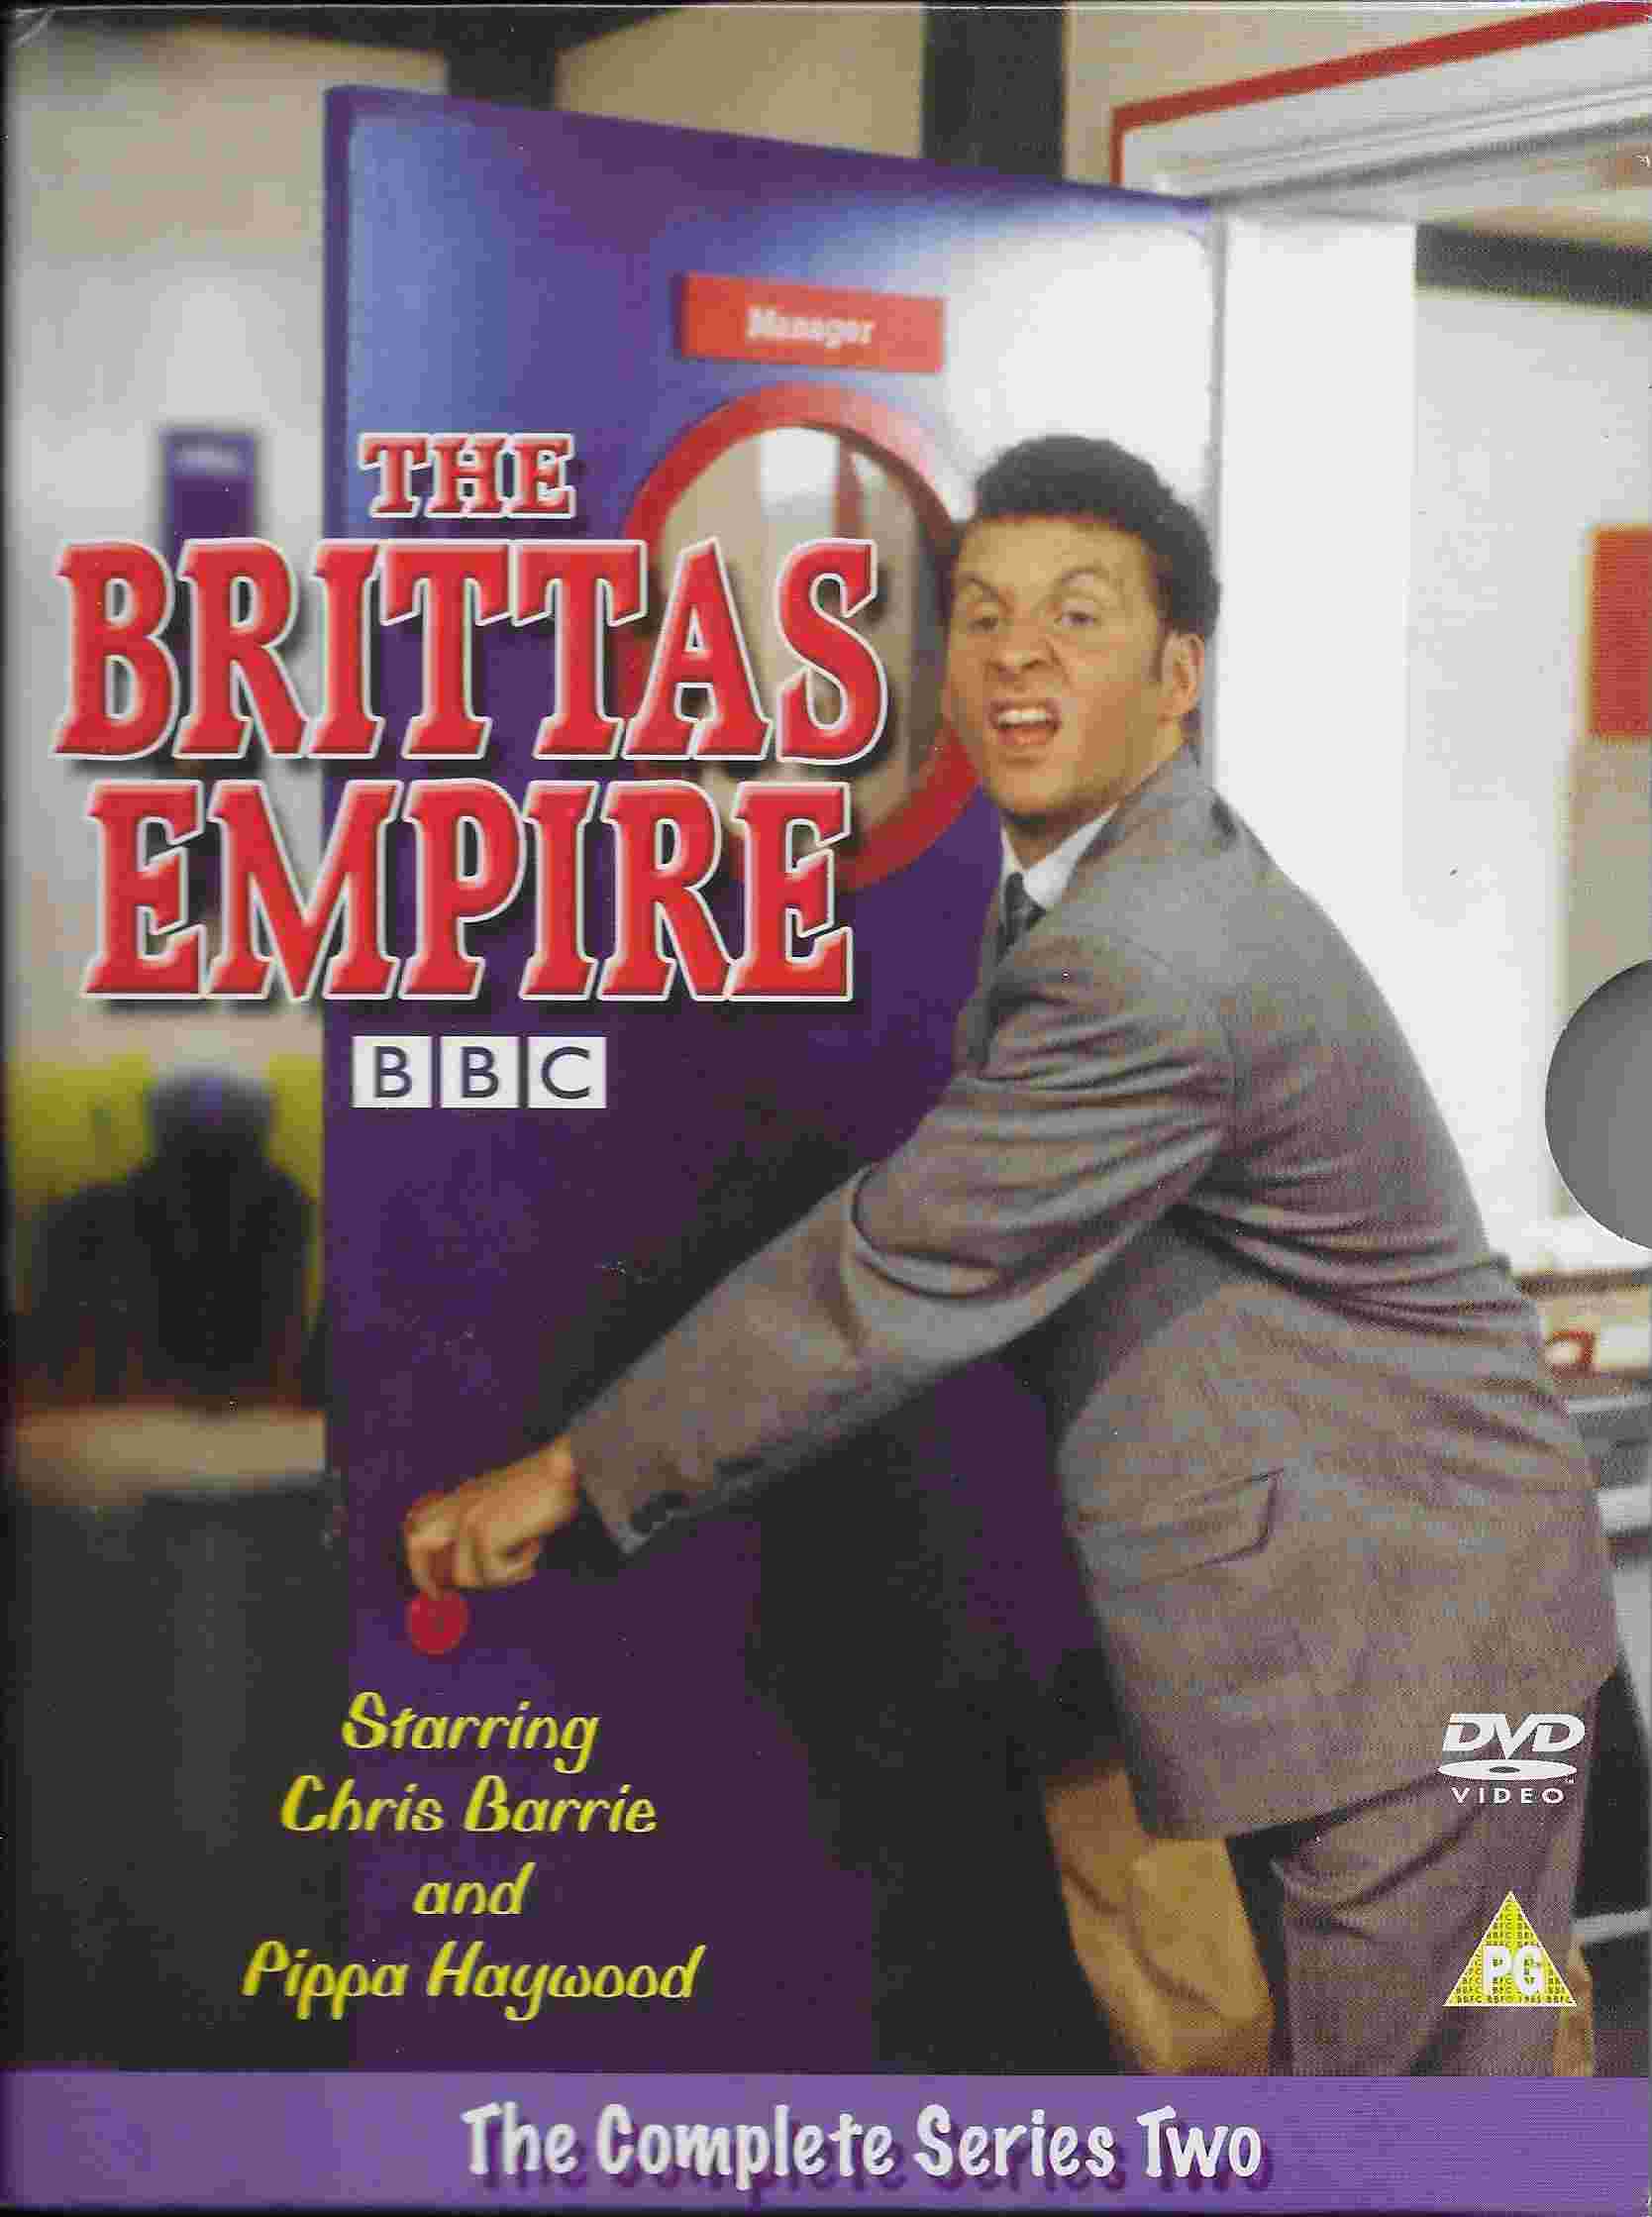 Picture of EKA 50012 The Brittas empire - Series 2 by artist Richard Fegen / Andrew Norriss from the BBC dvds - Records and Tapes library